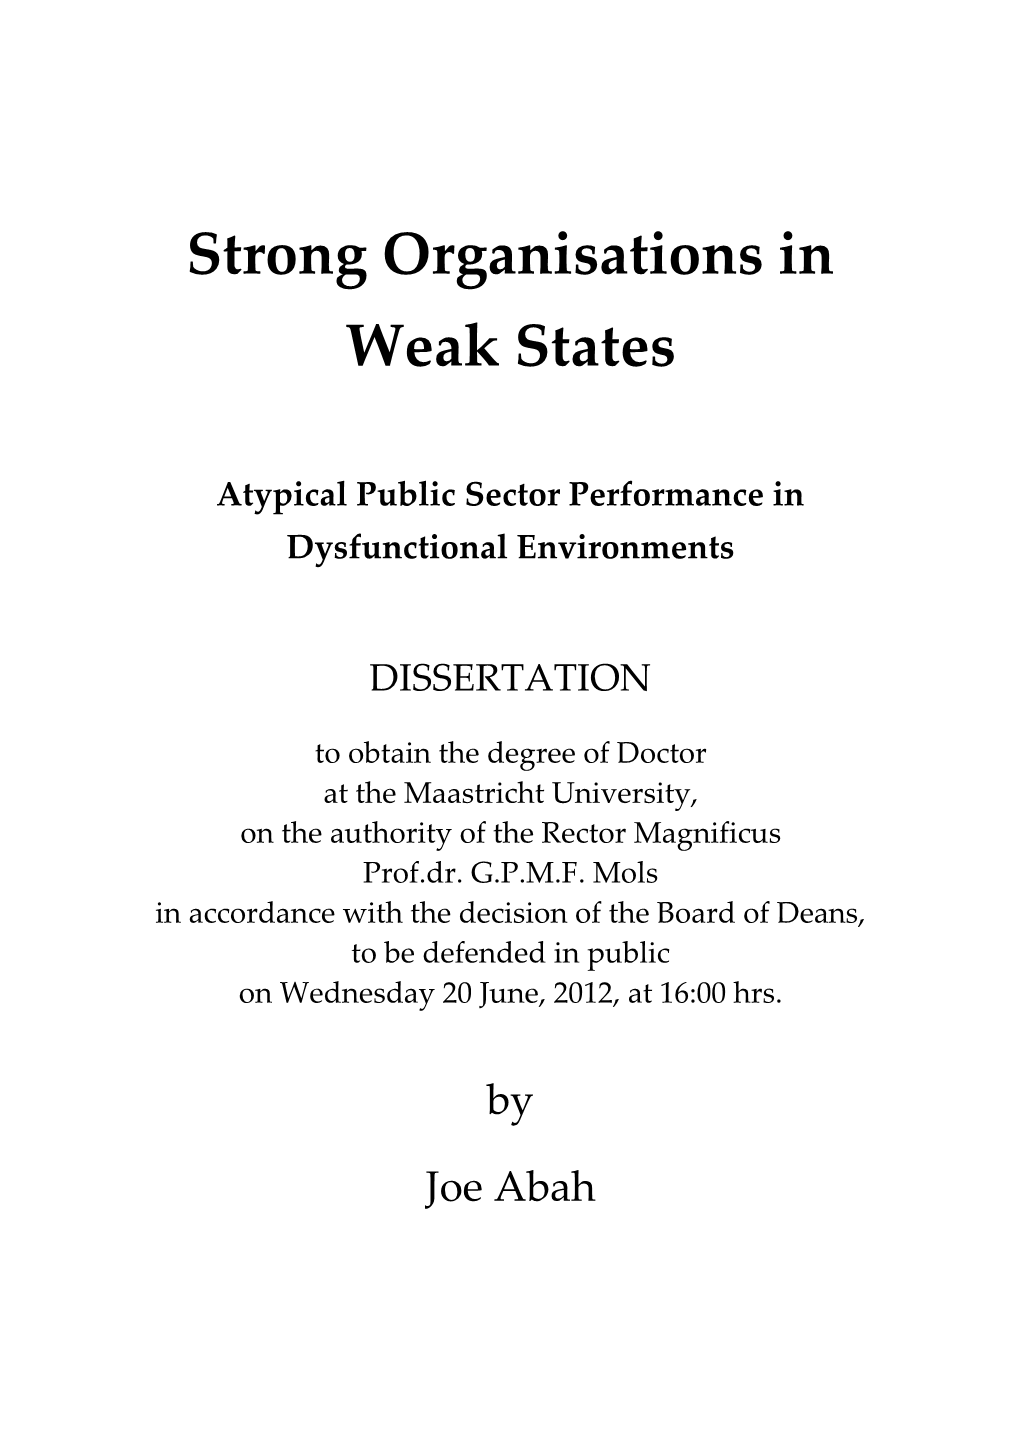 Strong Organisations in Weak States Is “Something Whose Occurrence Is Idiosyncratic and Therefore Perhaps an Exception to The